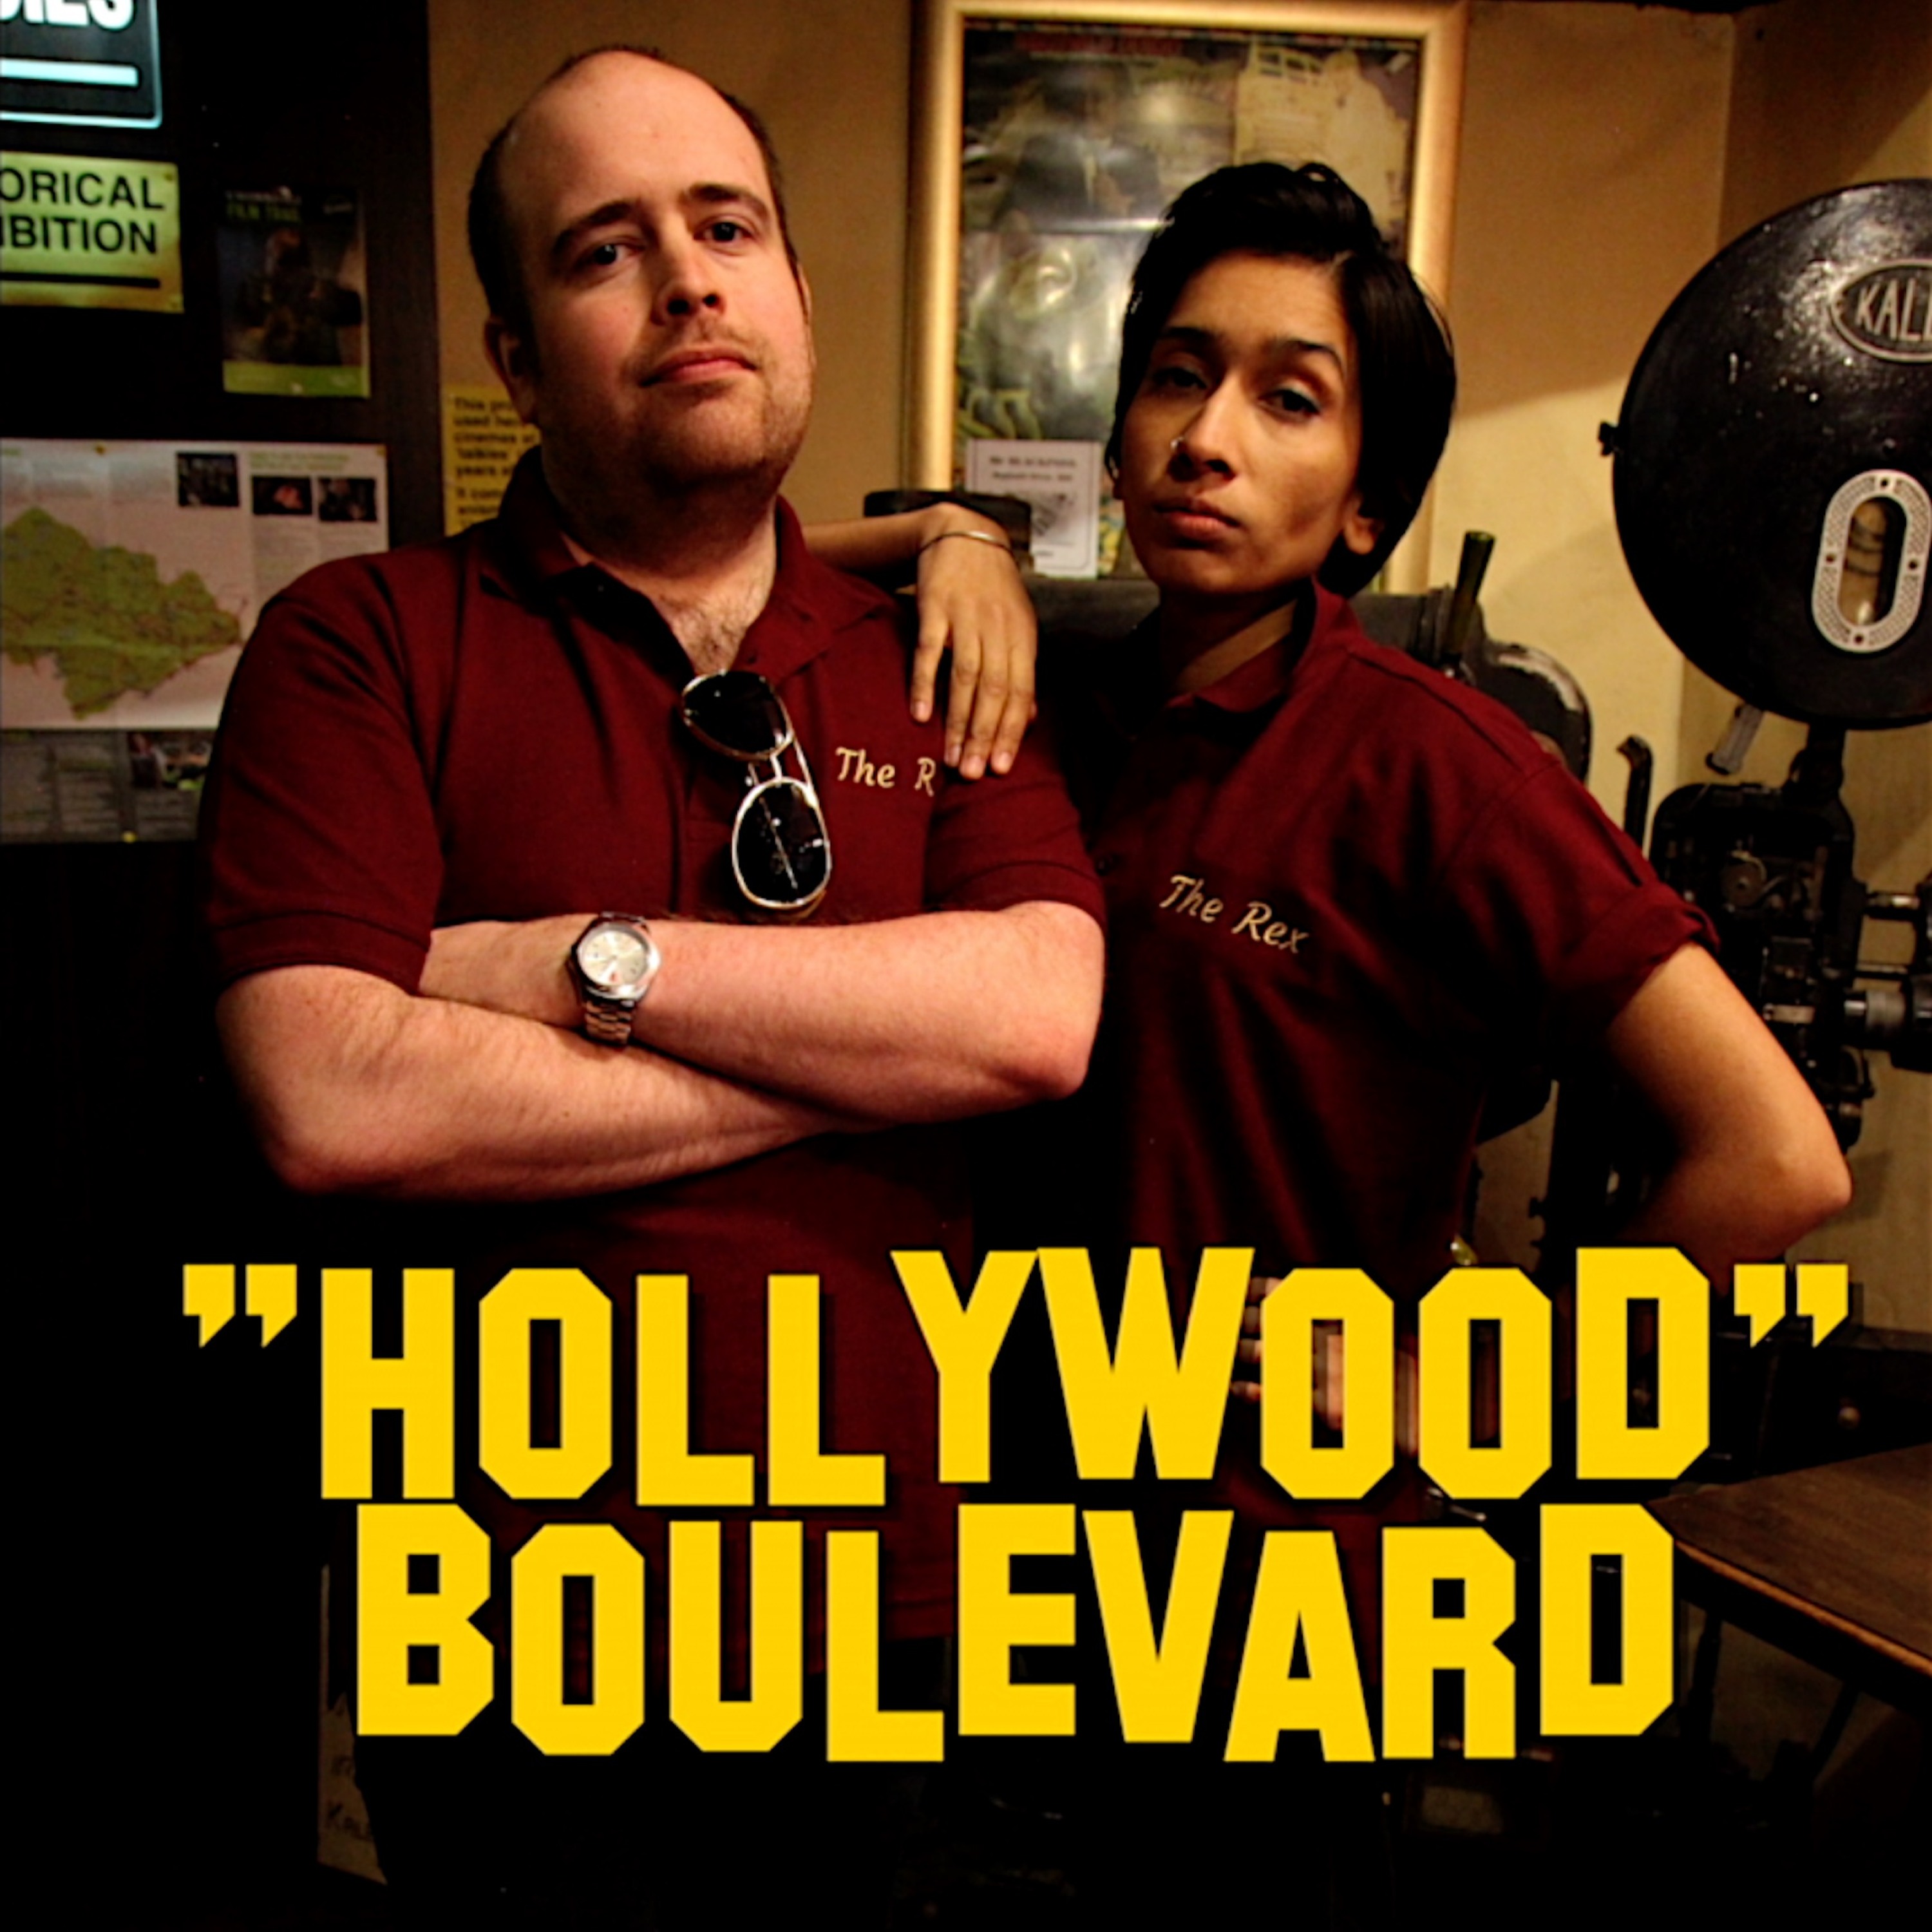 The Making of ”Hollywood Boulevard” - Episode 5: The Peaks & Valleys of Pre-Production